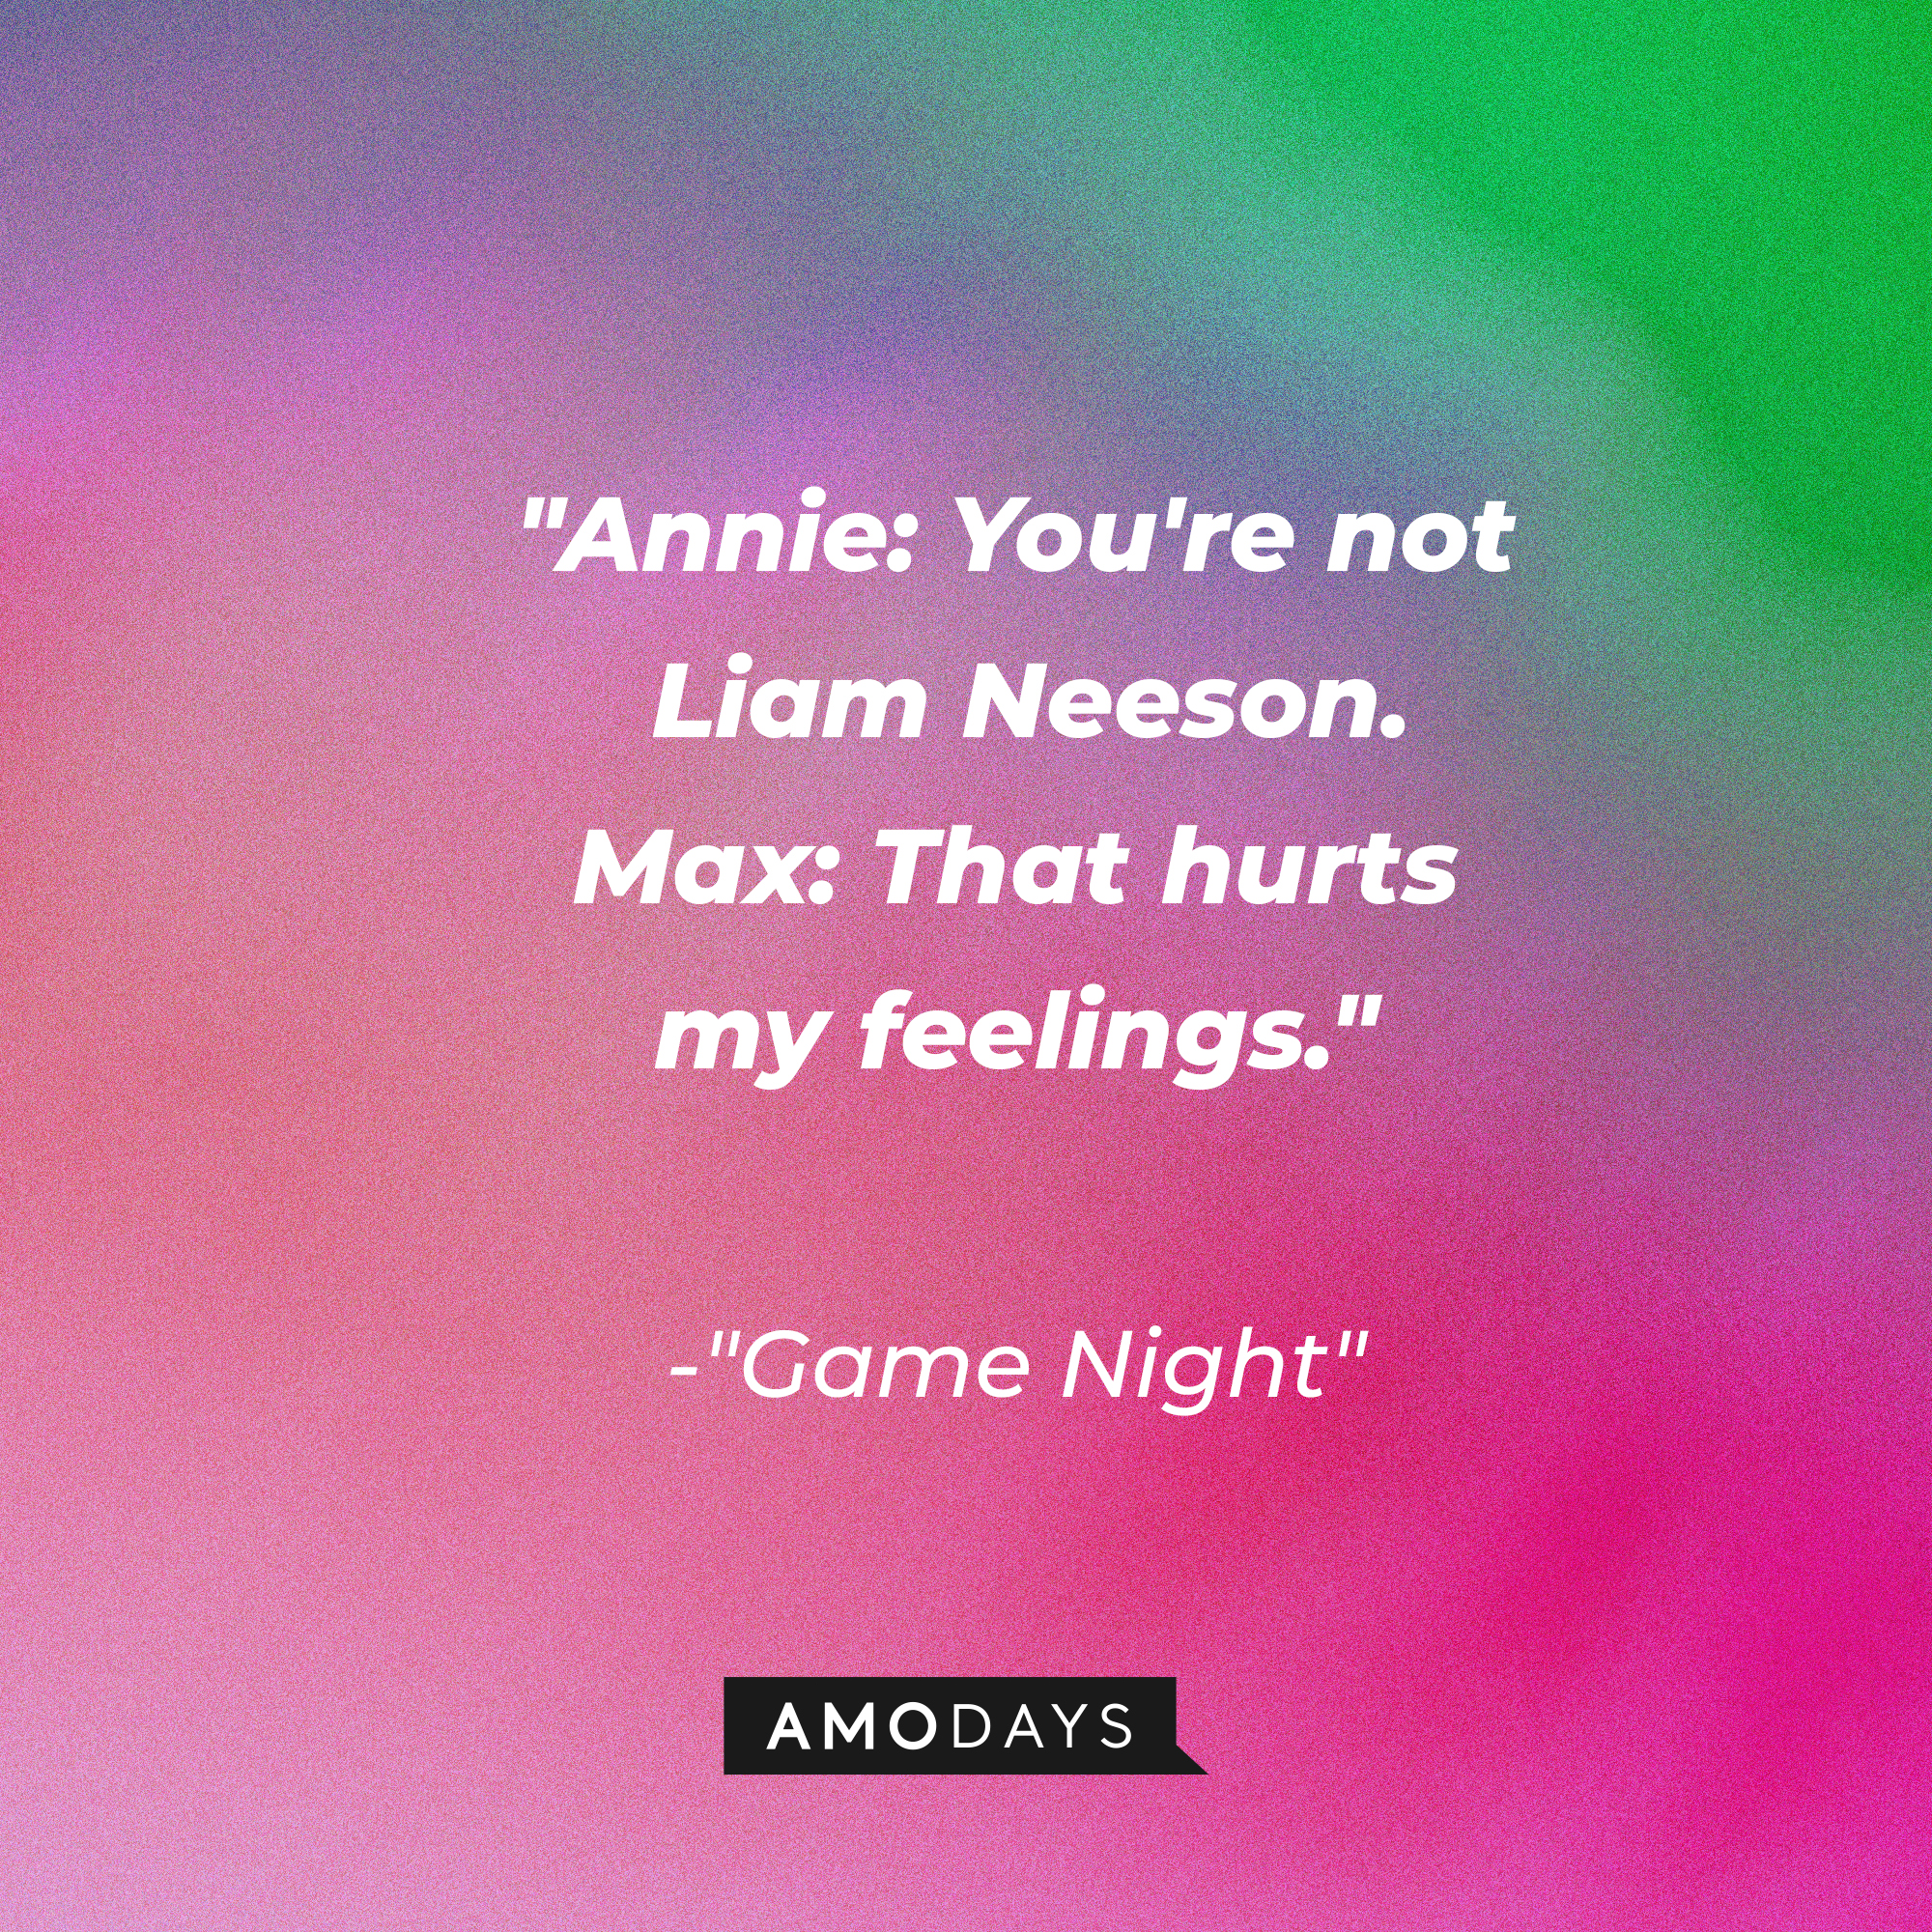 Quote from “Game Night”: “Annie: You're not Liam Neeson. Max: That hurts my feelings.” | Source: AmoDays